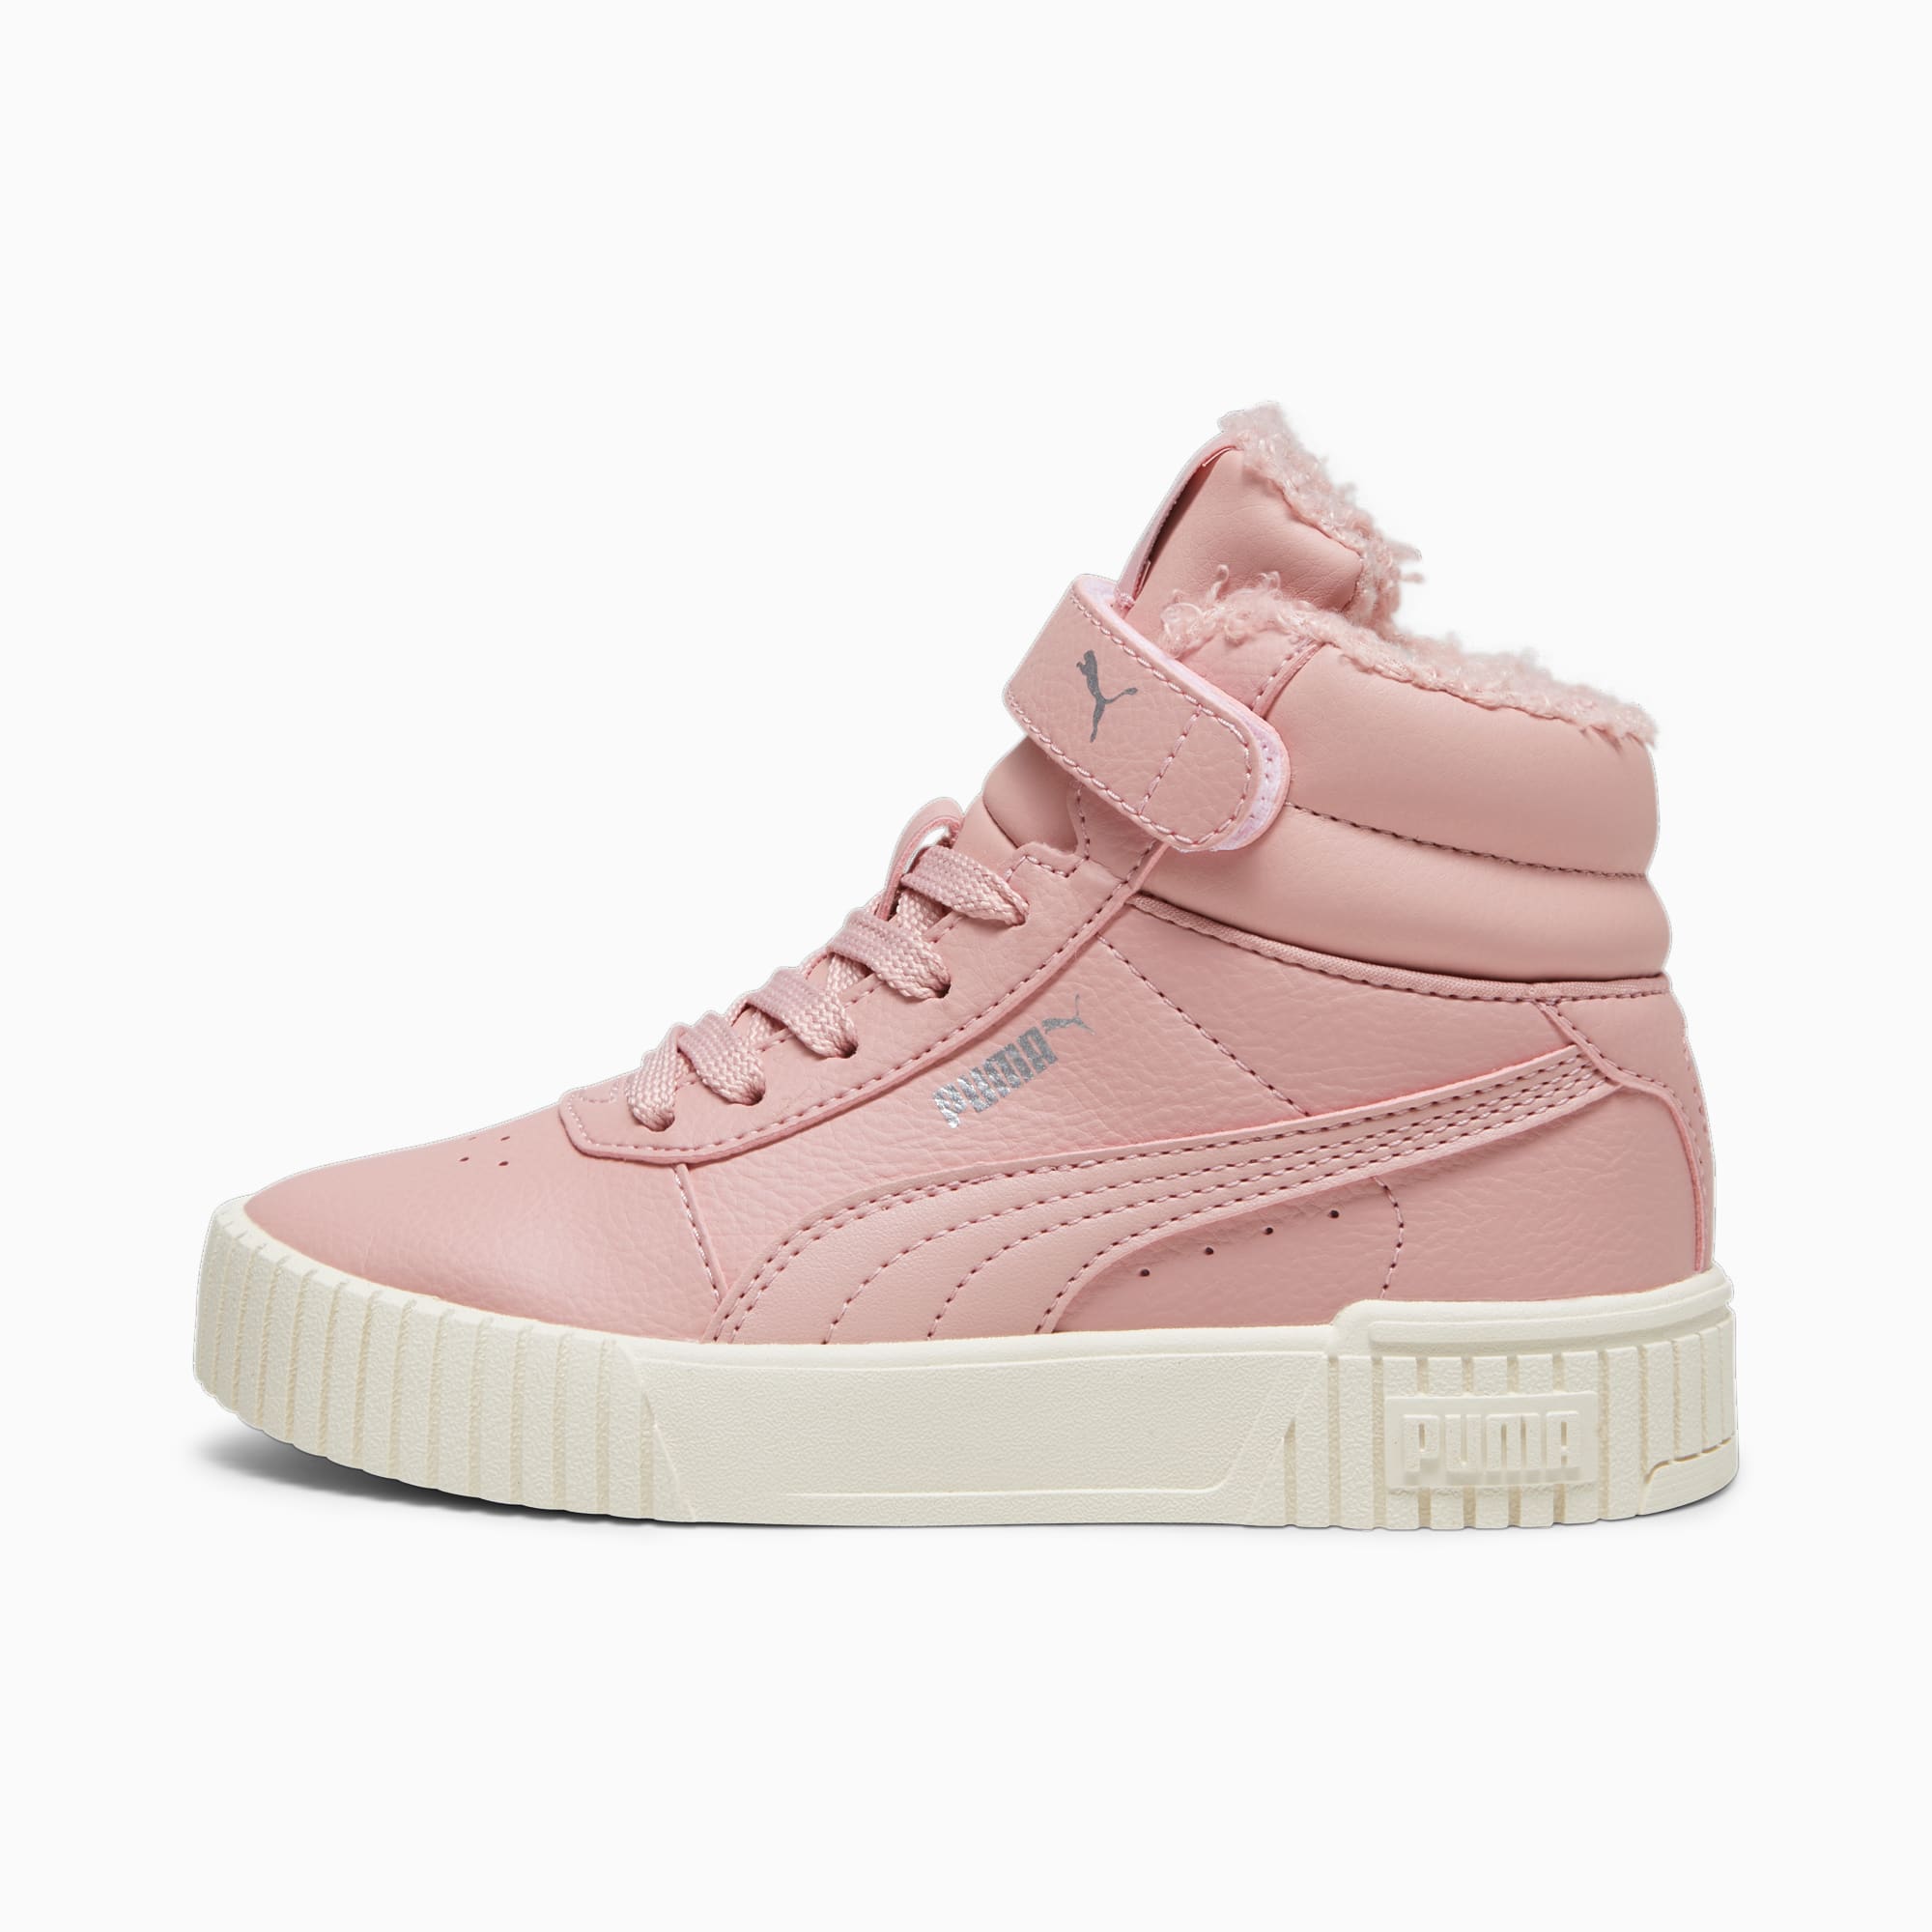 PUMA Carina 2.0 Mid Winter Sneakers Kids, Future Pink/Silver/Alpine Snow, Size 31,5, Shoes